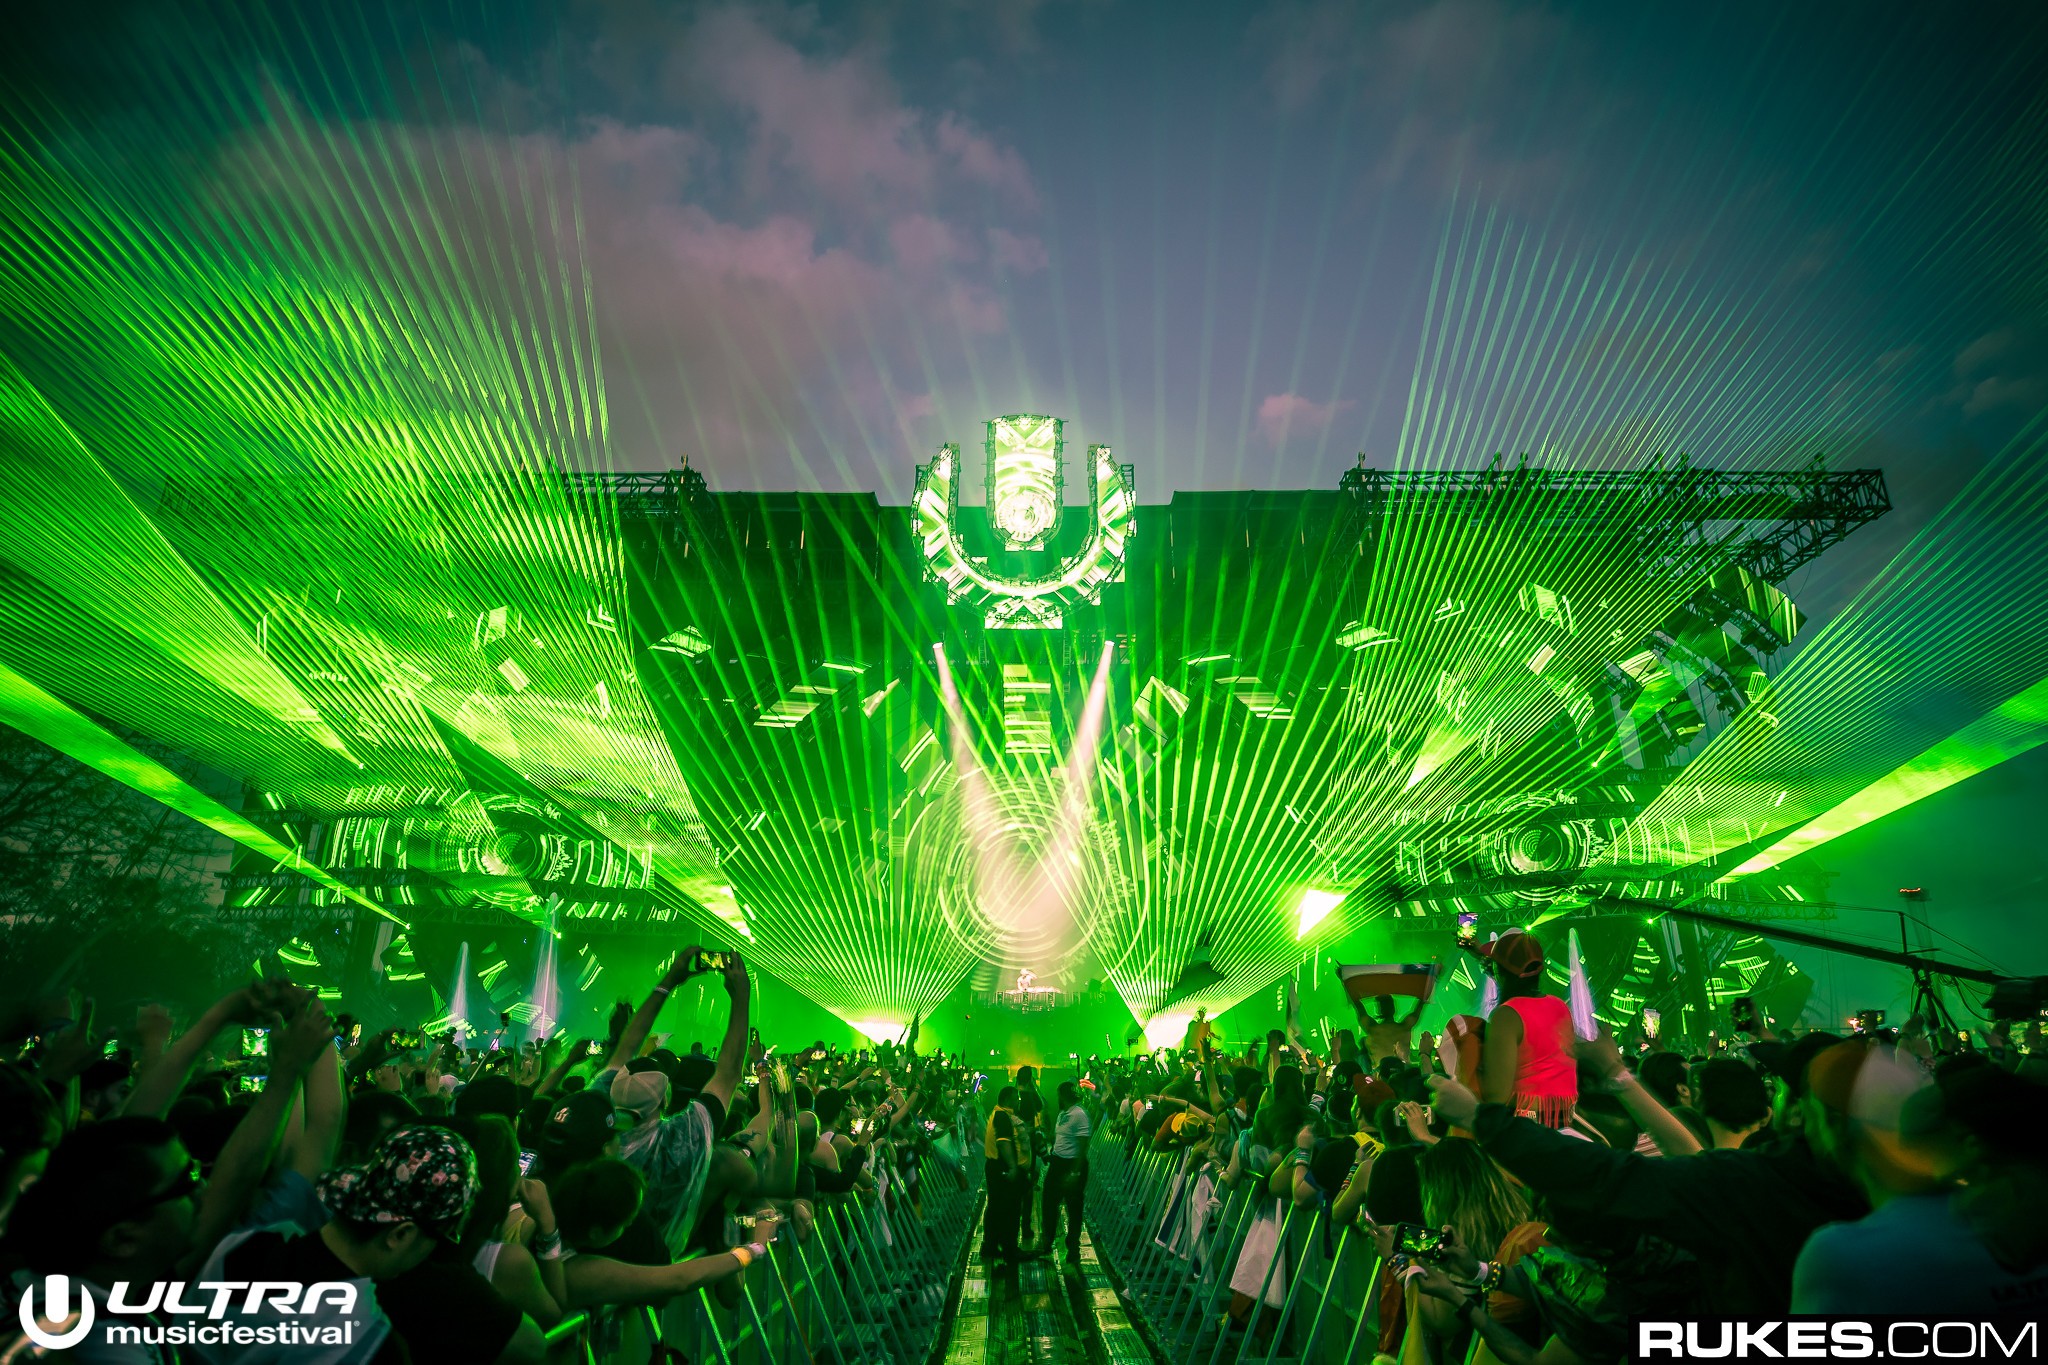 Ultra Music Festival Rukes Stages Lights Photography Lasers Crowds Music 2048x1365